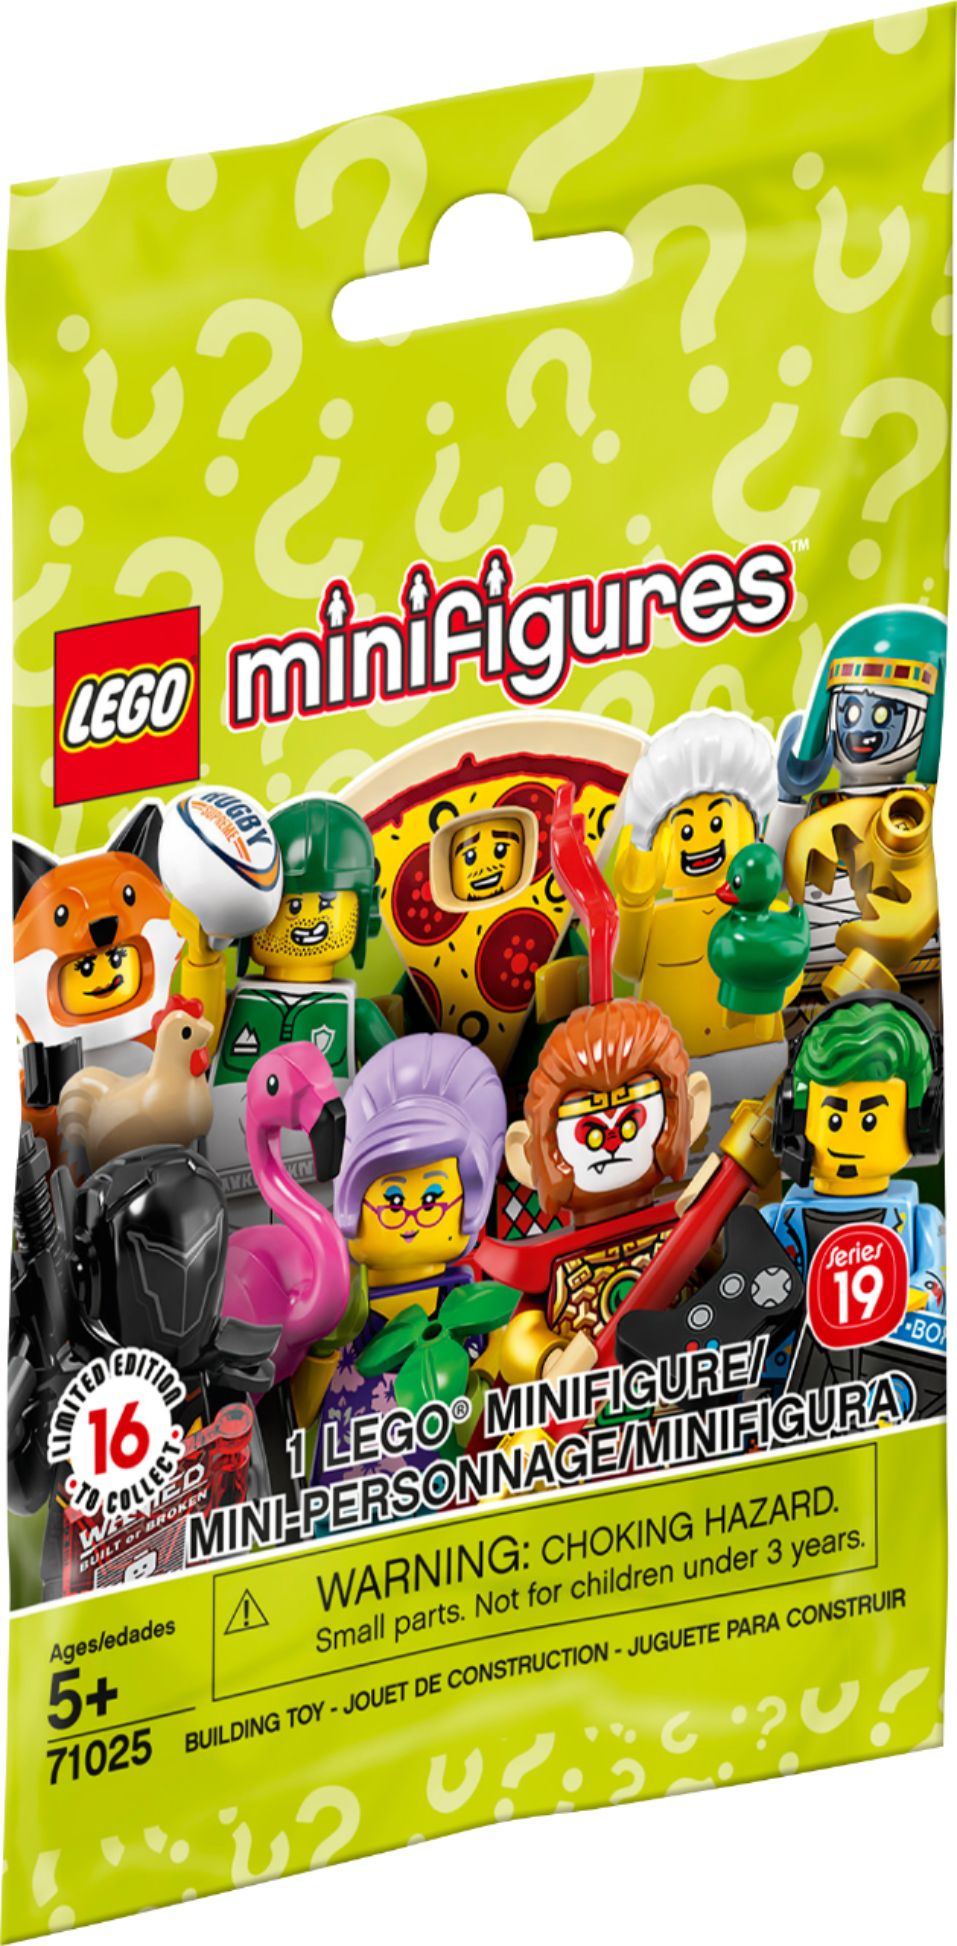 where can i buy lego minifigures